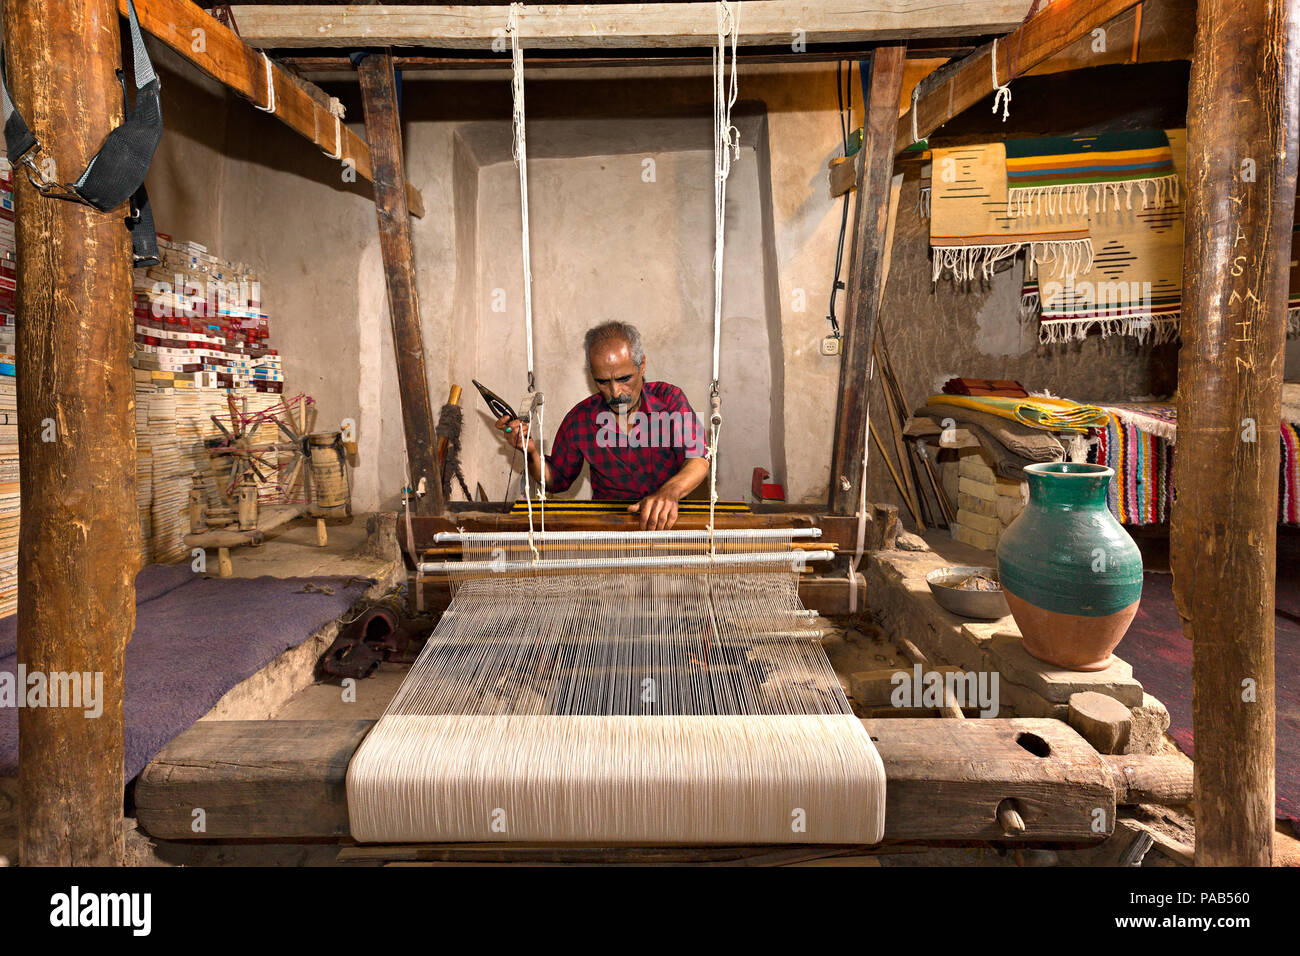 Iranian man weaves fabrics known as Aba, in traditional way, in the town of Naein, Iran. Stock Photo